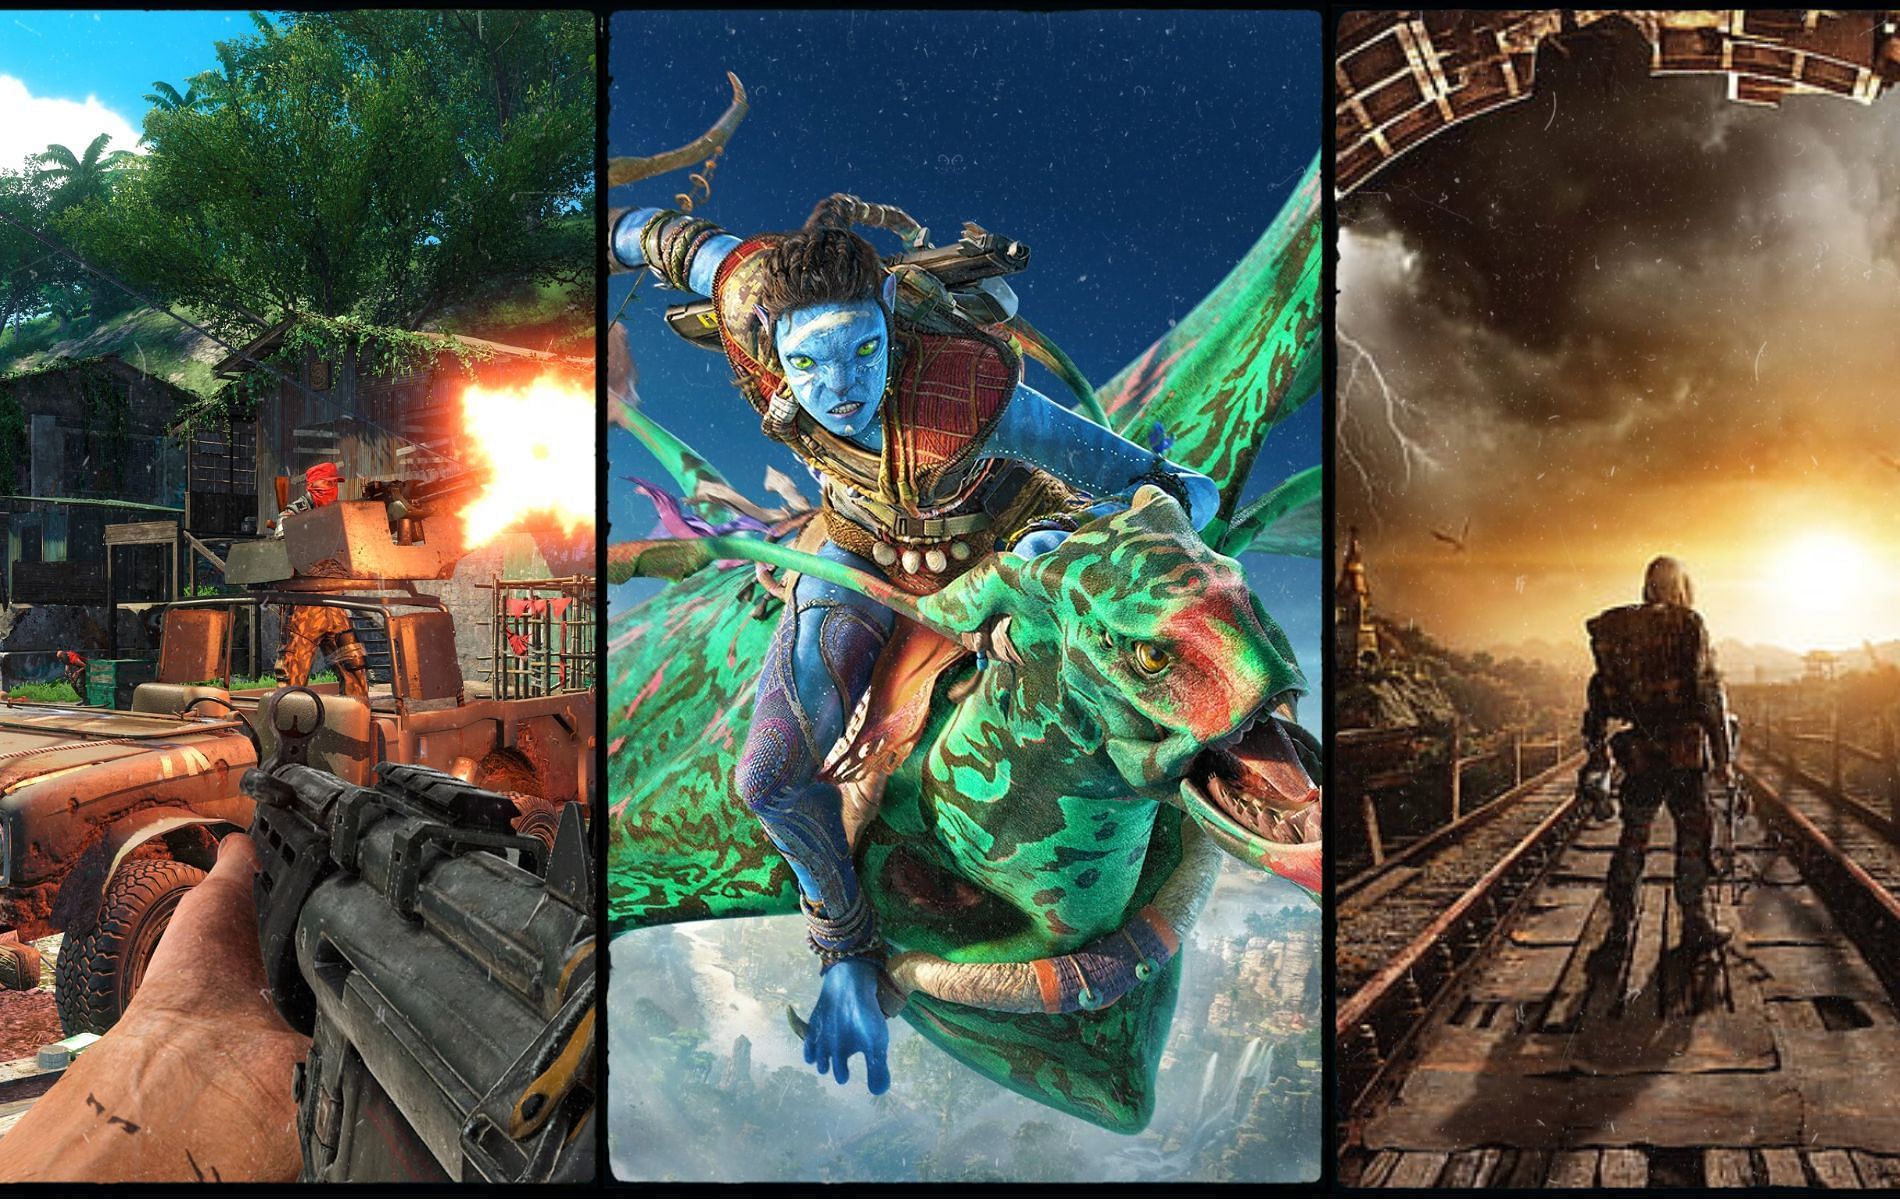 Screenshots/ cover art from FarCry3, Avatar: Frontiers of Pandora and Metro Exodus)